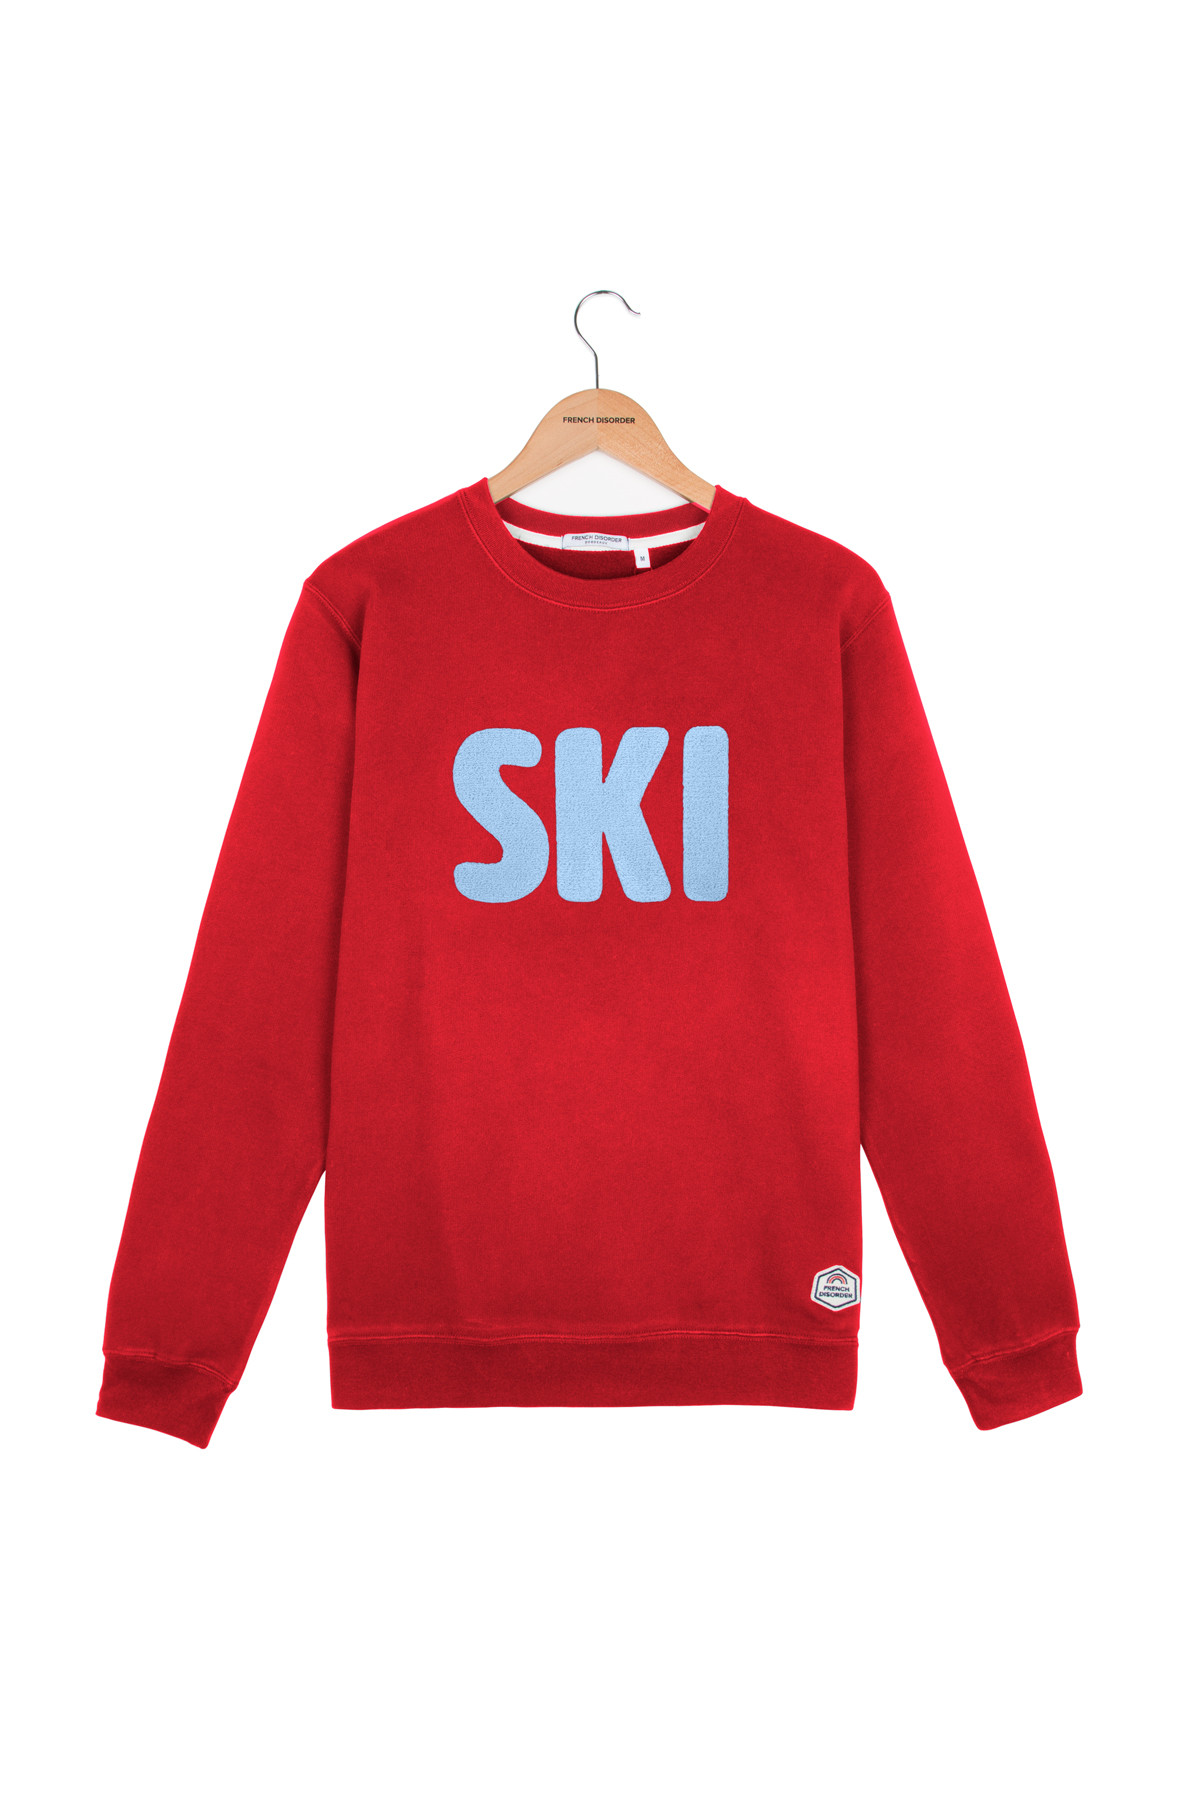 Photo de Soldes homme Sweat SKI broderie chez French Disorder